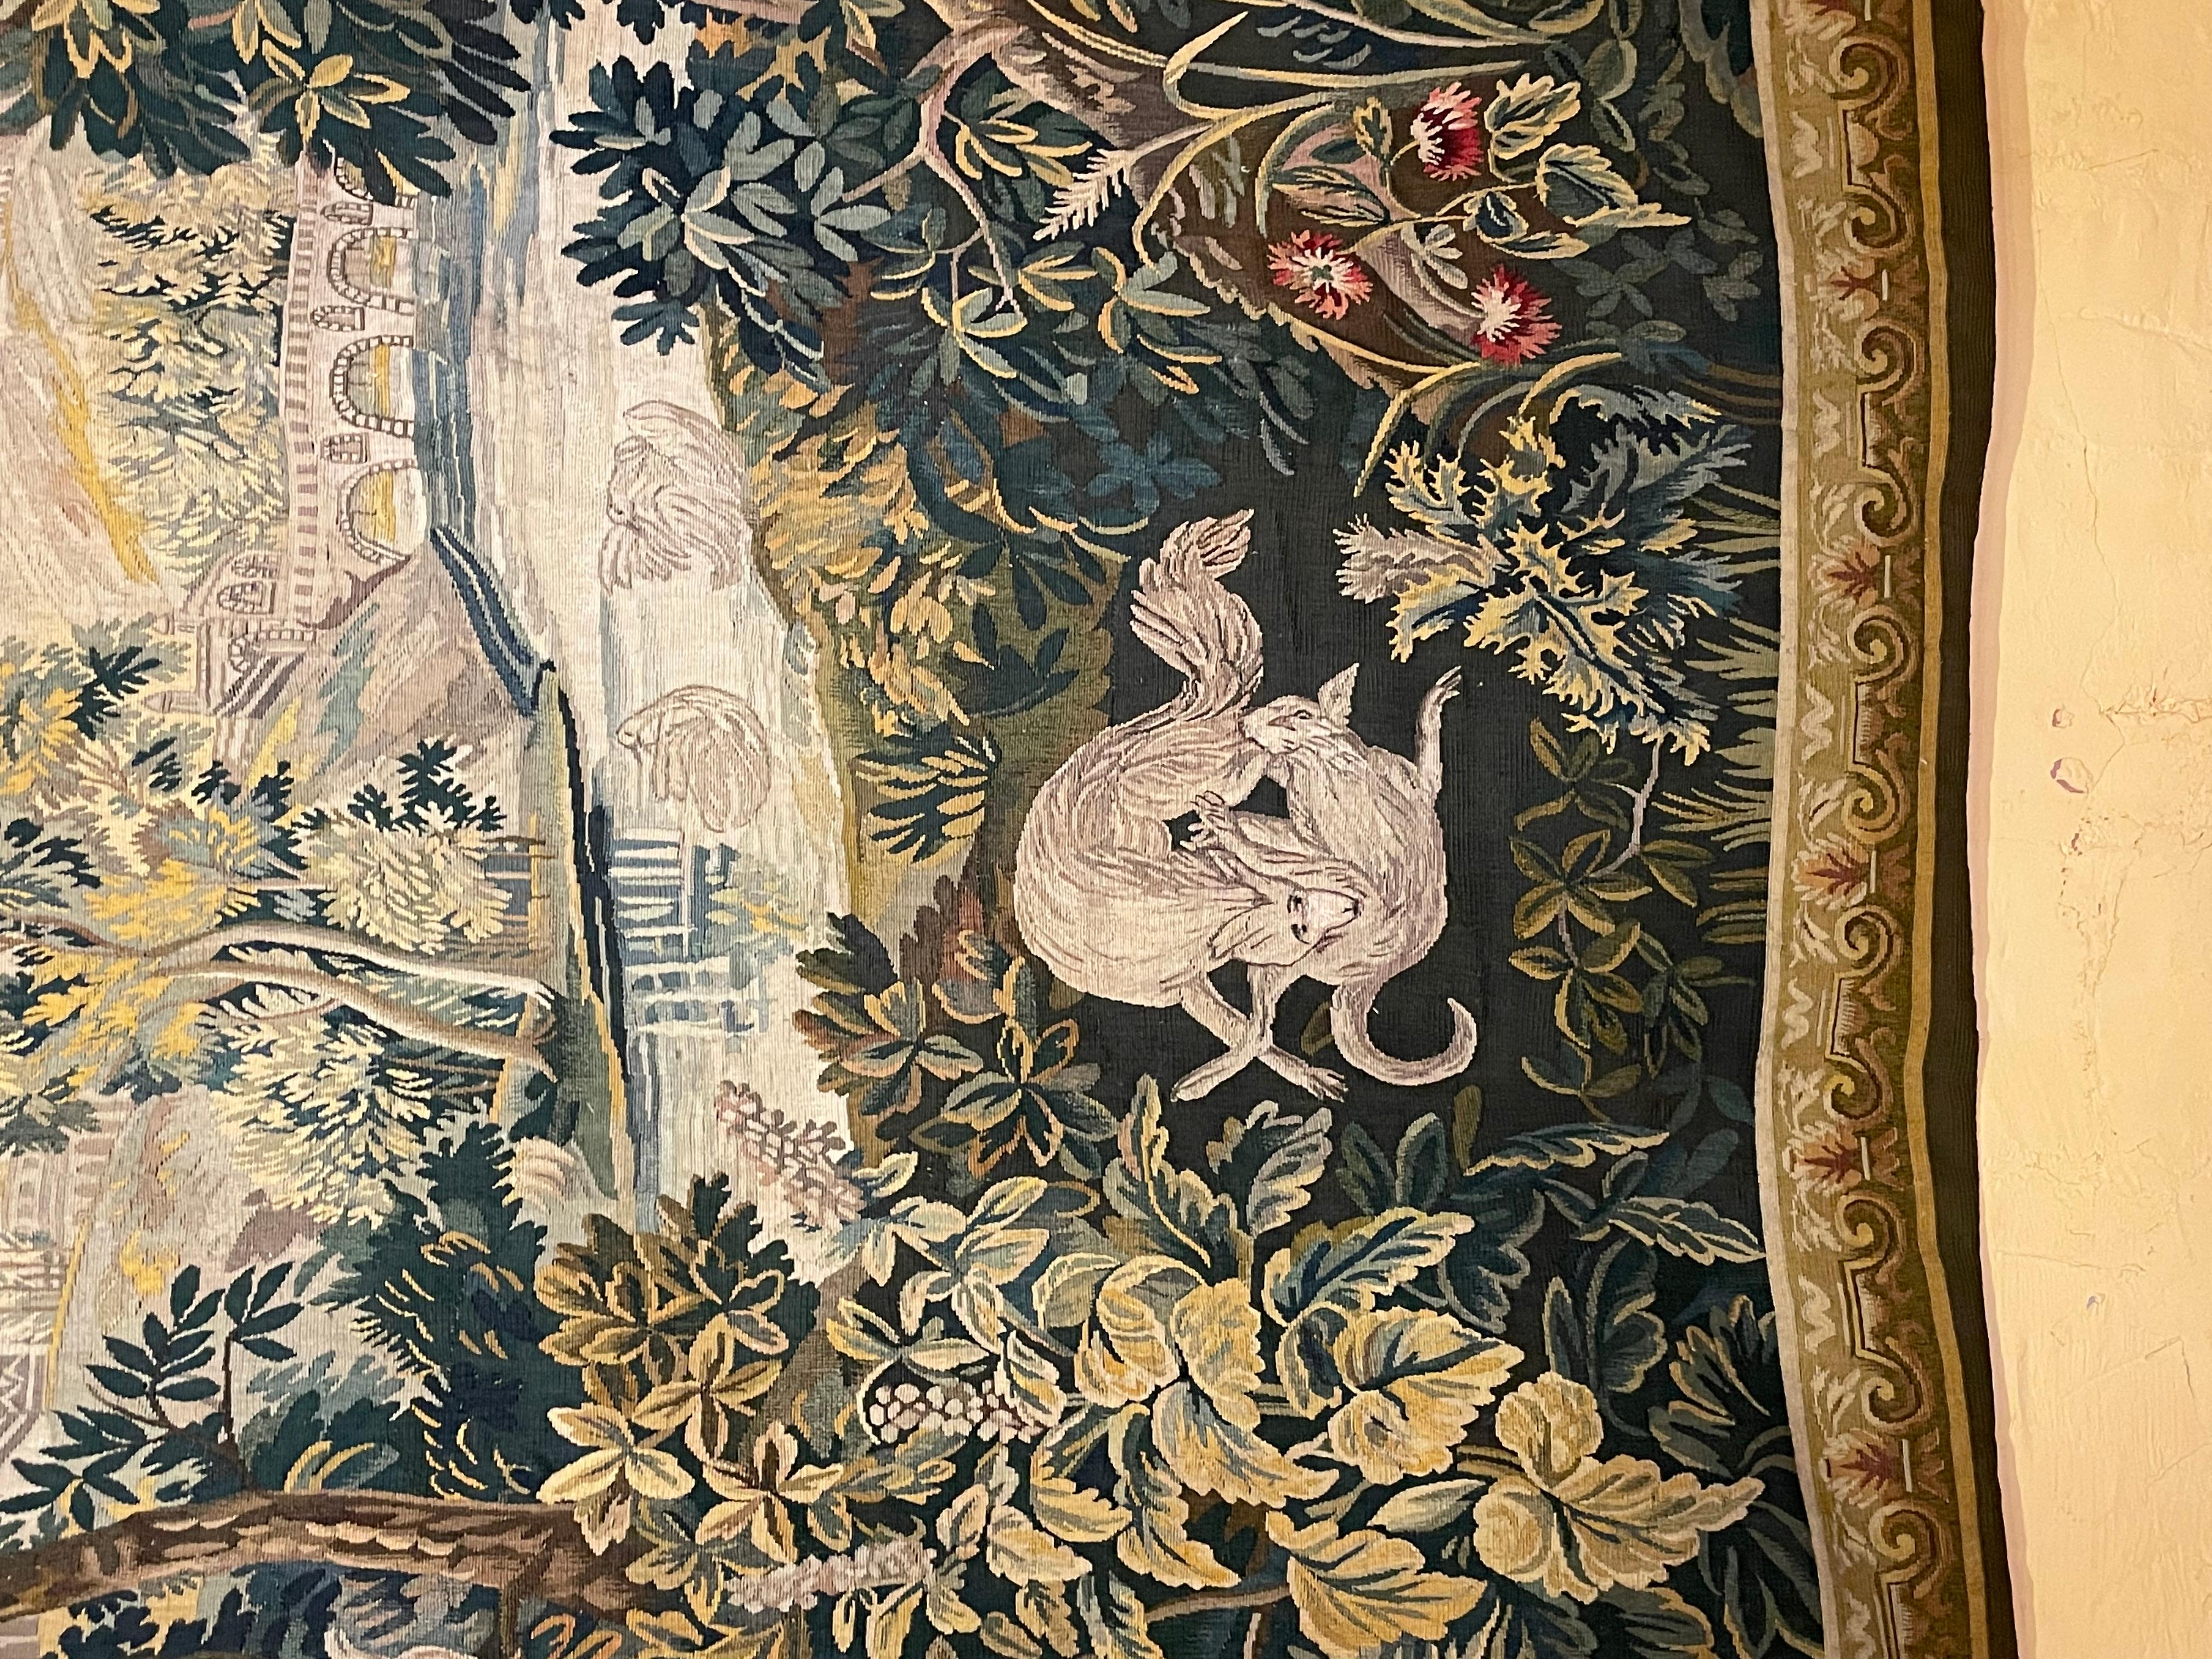 Superb Aubusson tapestry Louis XVI period with his border representing a verdure with a castle, ancient ruins as well as several birds and a fox catching a rabbit

Superb decor and very beautiful proportions that can easily be placed in an